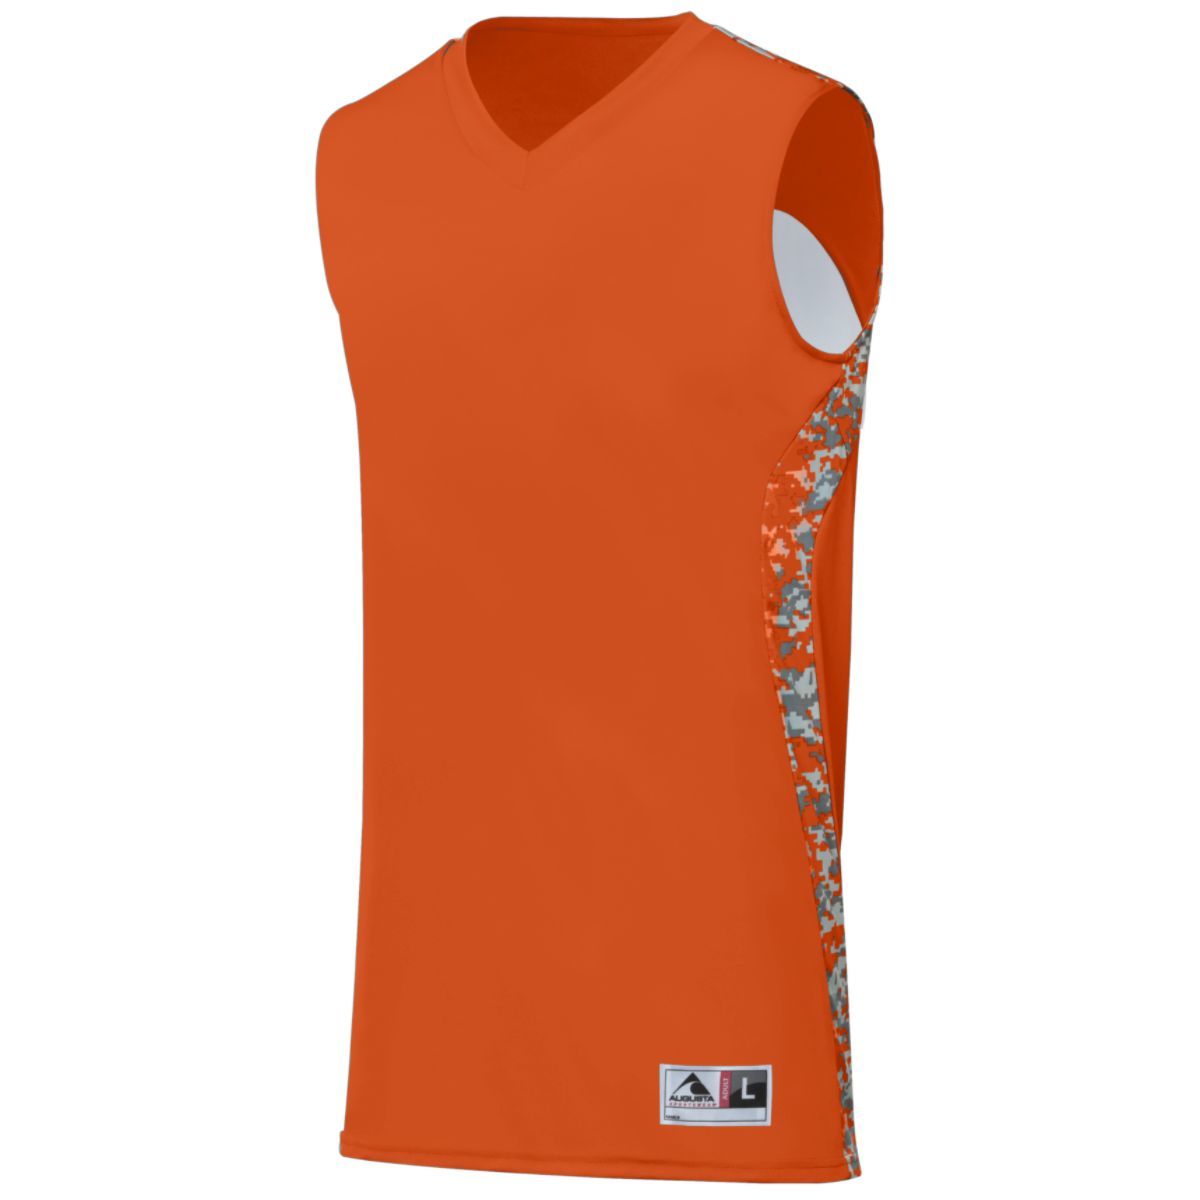 Augusta Sportswear Hook Shot Reversible Jersey in Orange/Orange Digi  -Part of the Adult, Adult-Jersey, Augusta-Products, Basketball, Shirts, All-Sports, All-Sports-1 product lines at KanaleyCreations.com